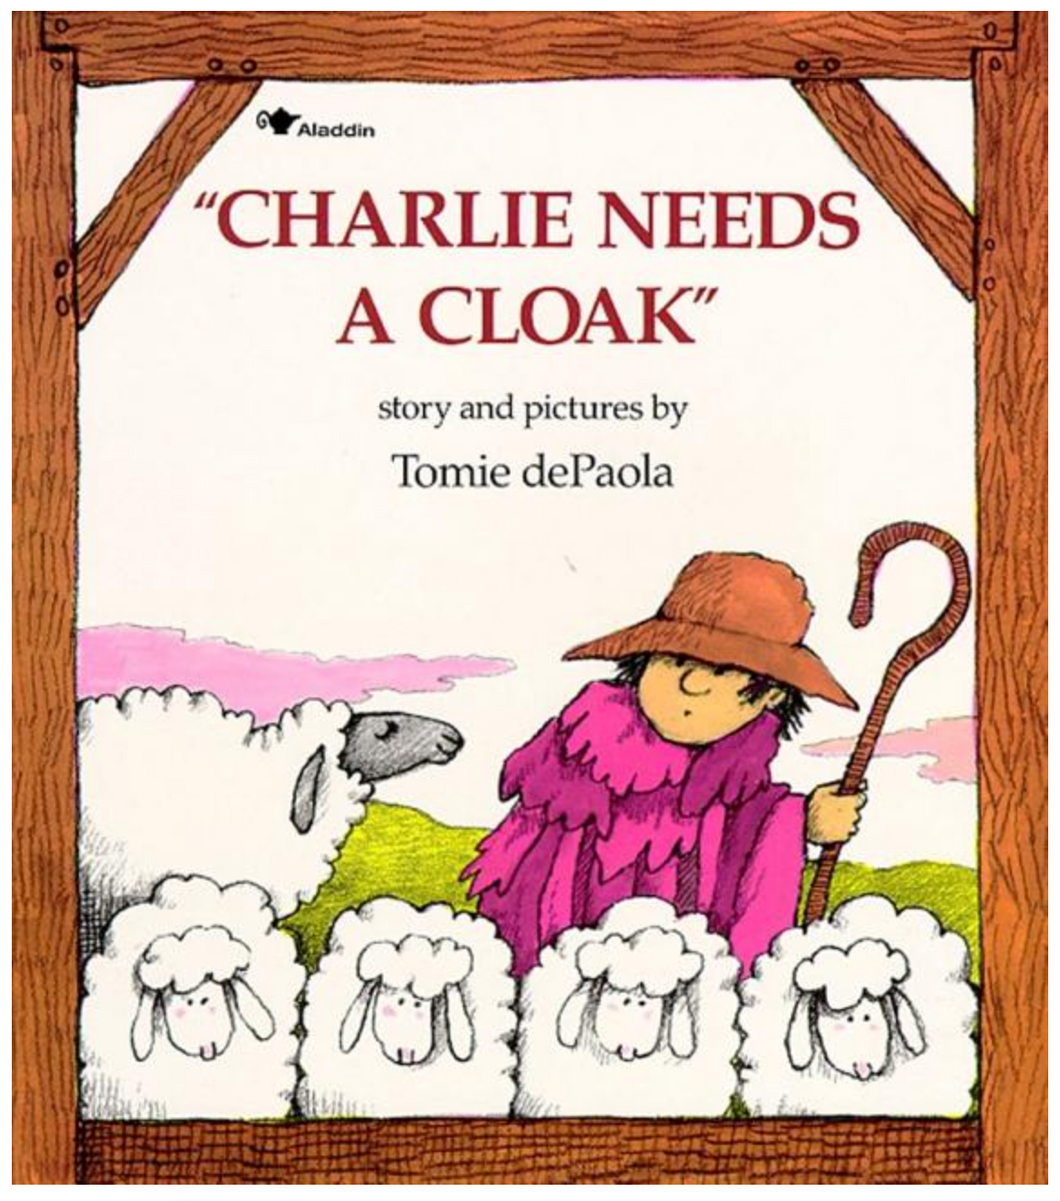 Charlie Needs a Cloak by Tommy dePaola